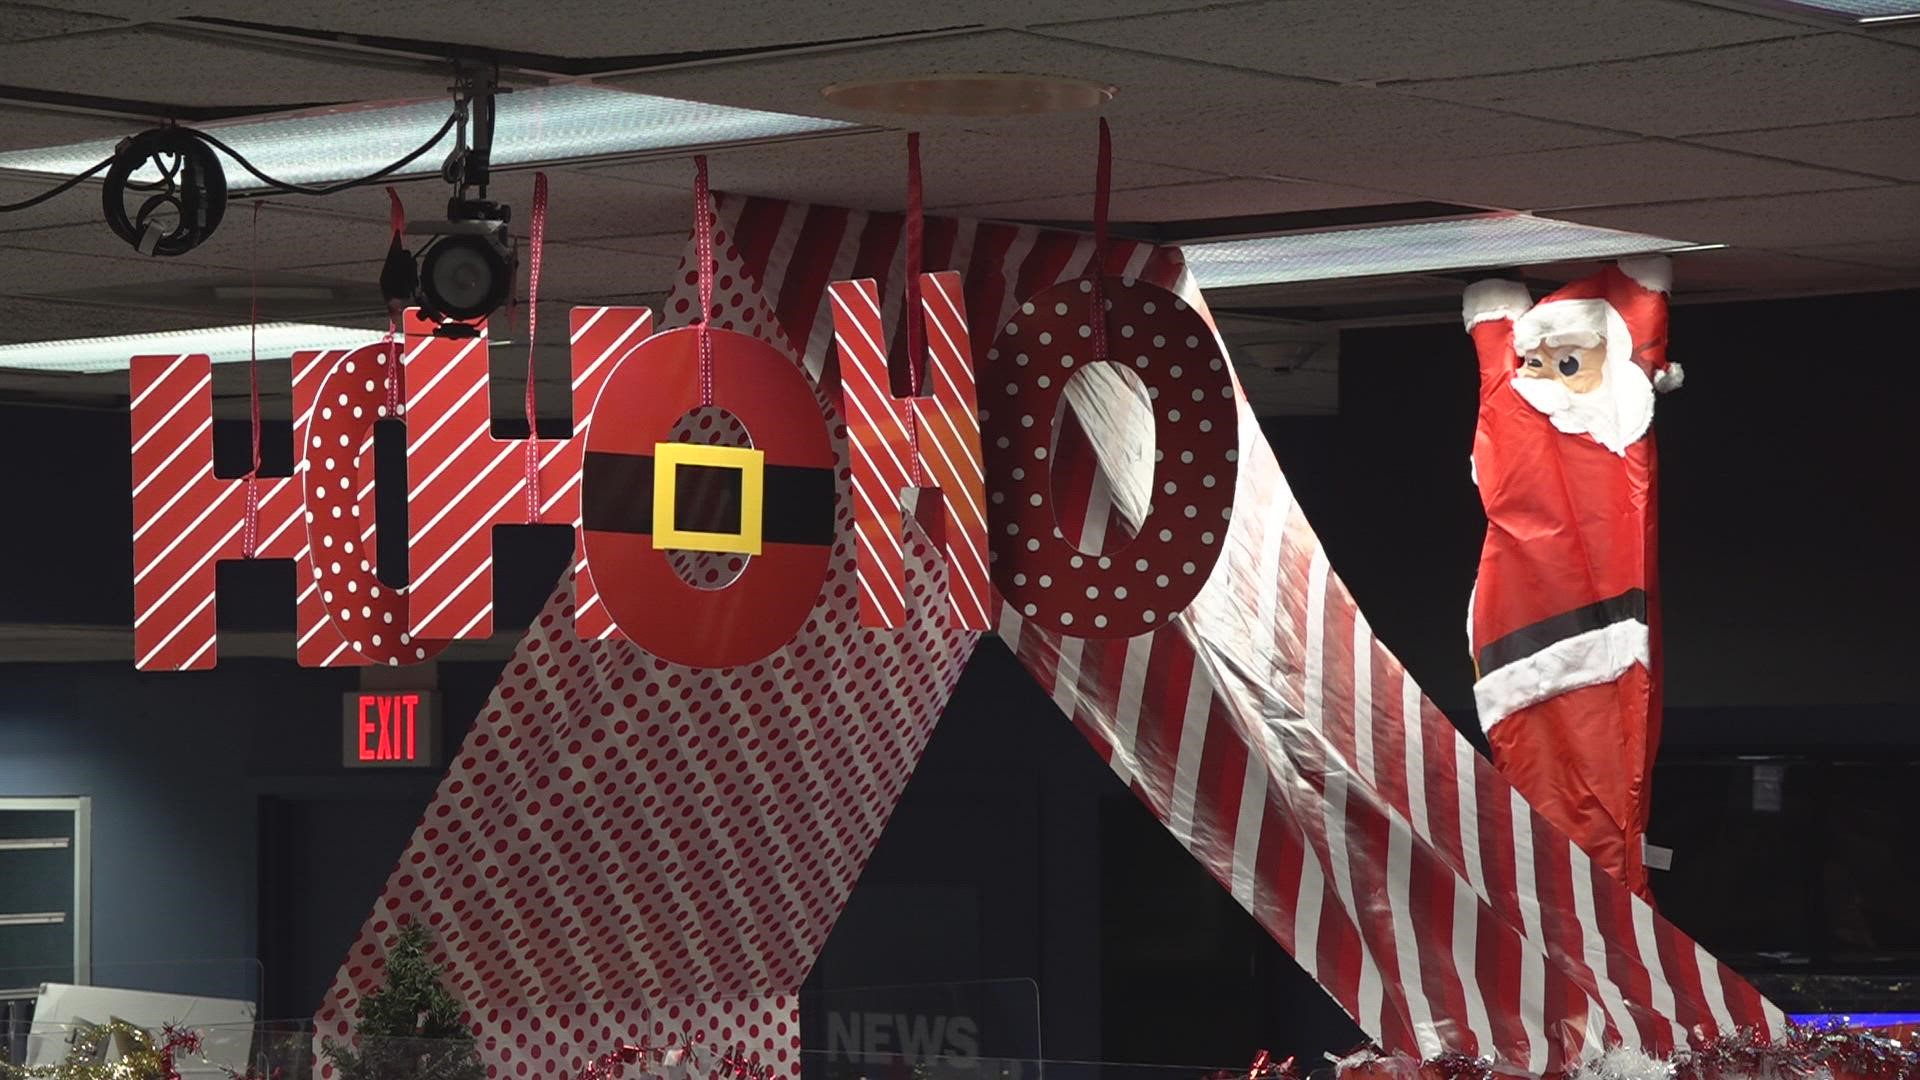 Behind the scenes action: WFMY News 2\'s Holiday desk decorating ...